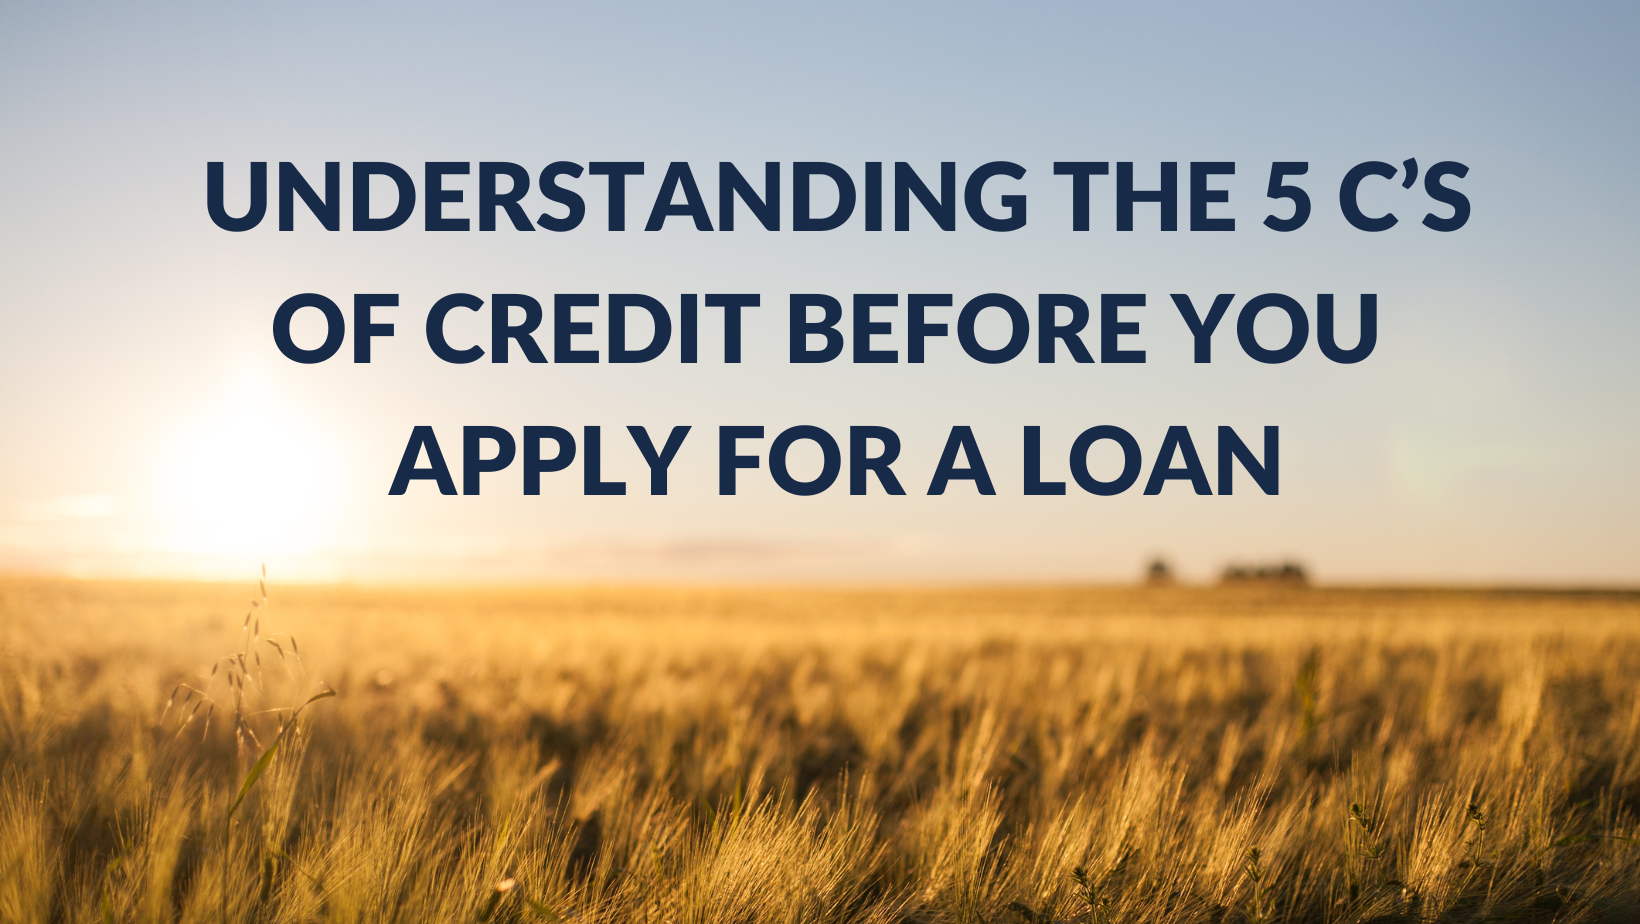 Understanding the 5 C’s of Credit before you apply for a loan